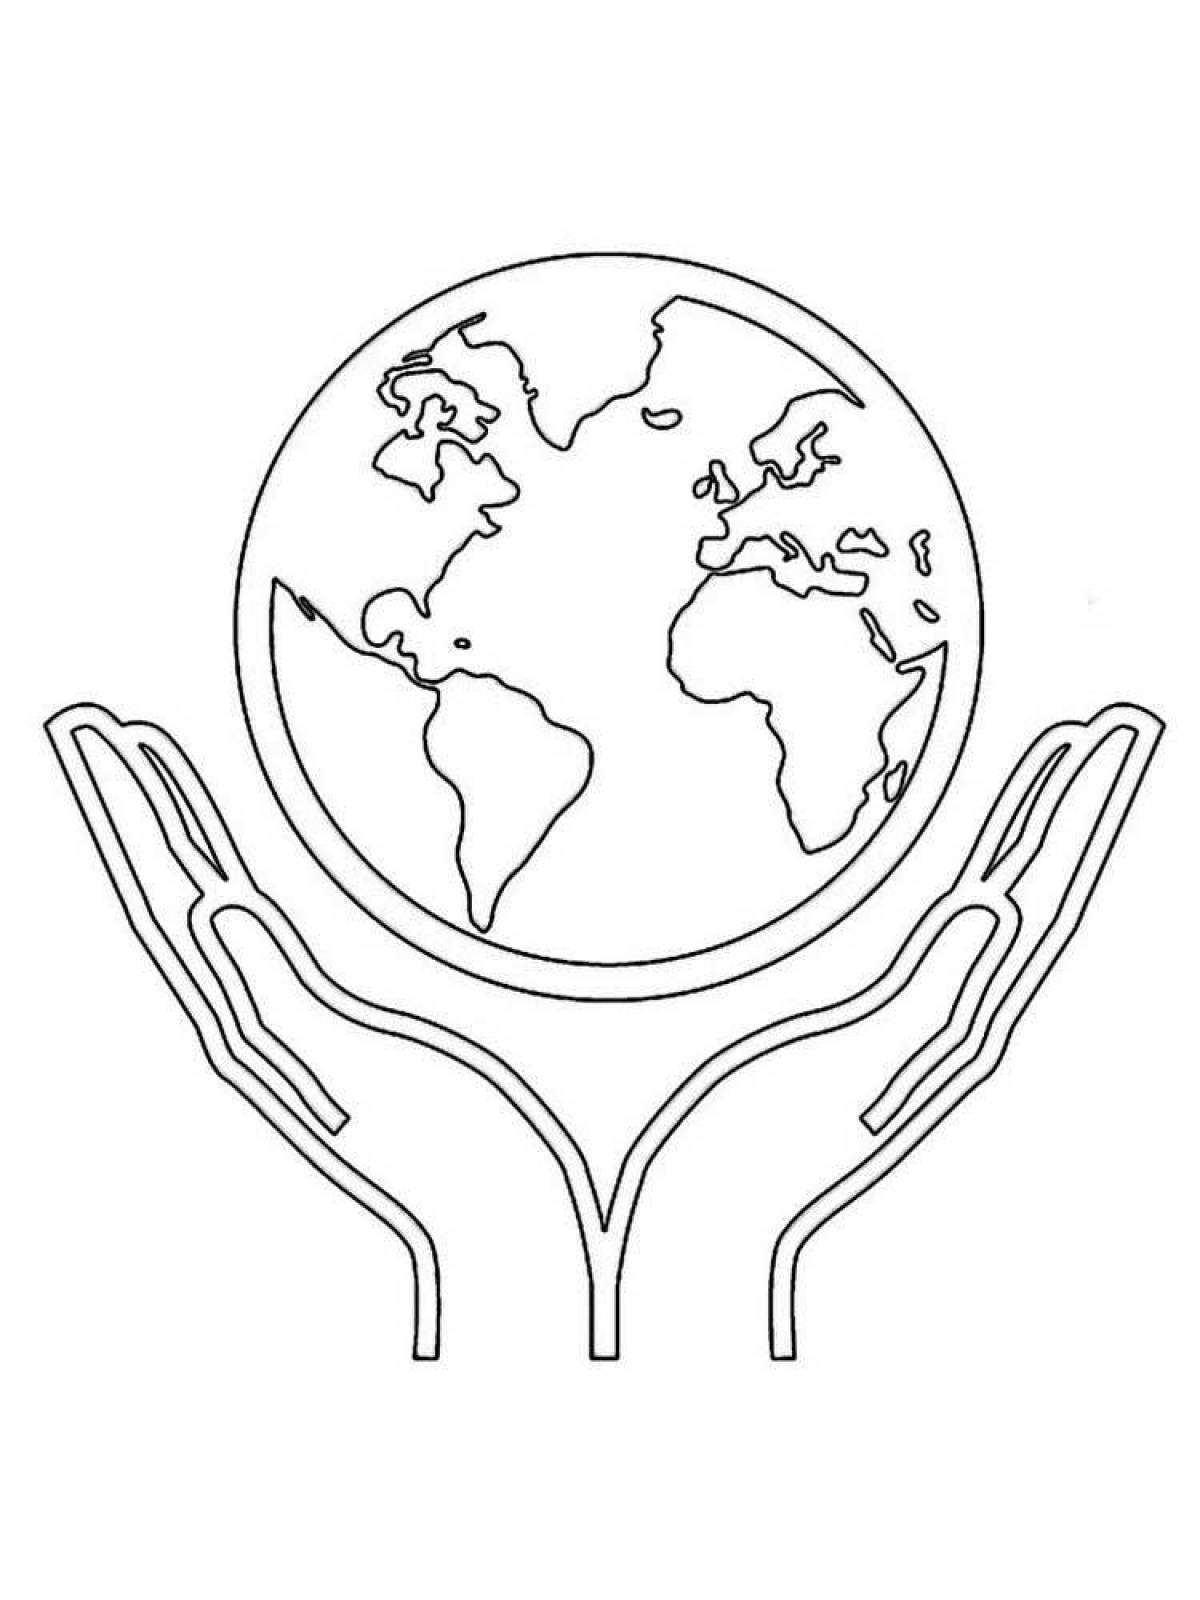 Fun planet earth coloring pages for kids